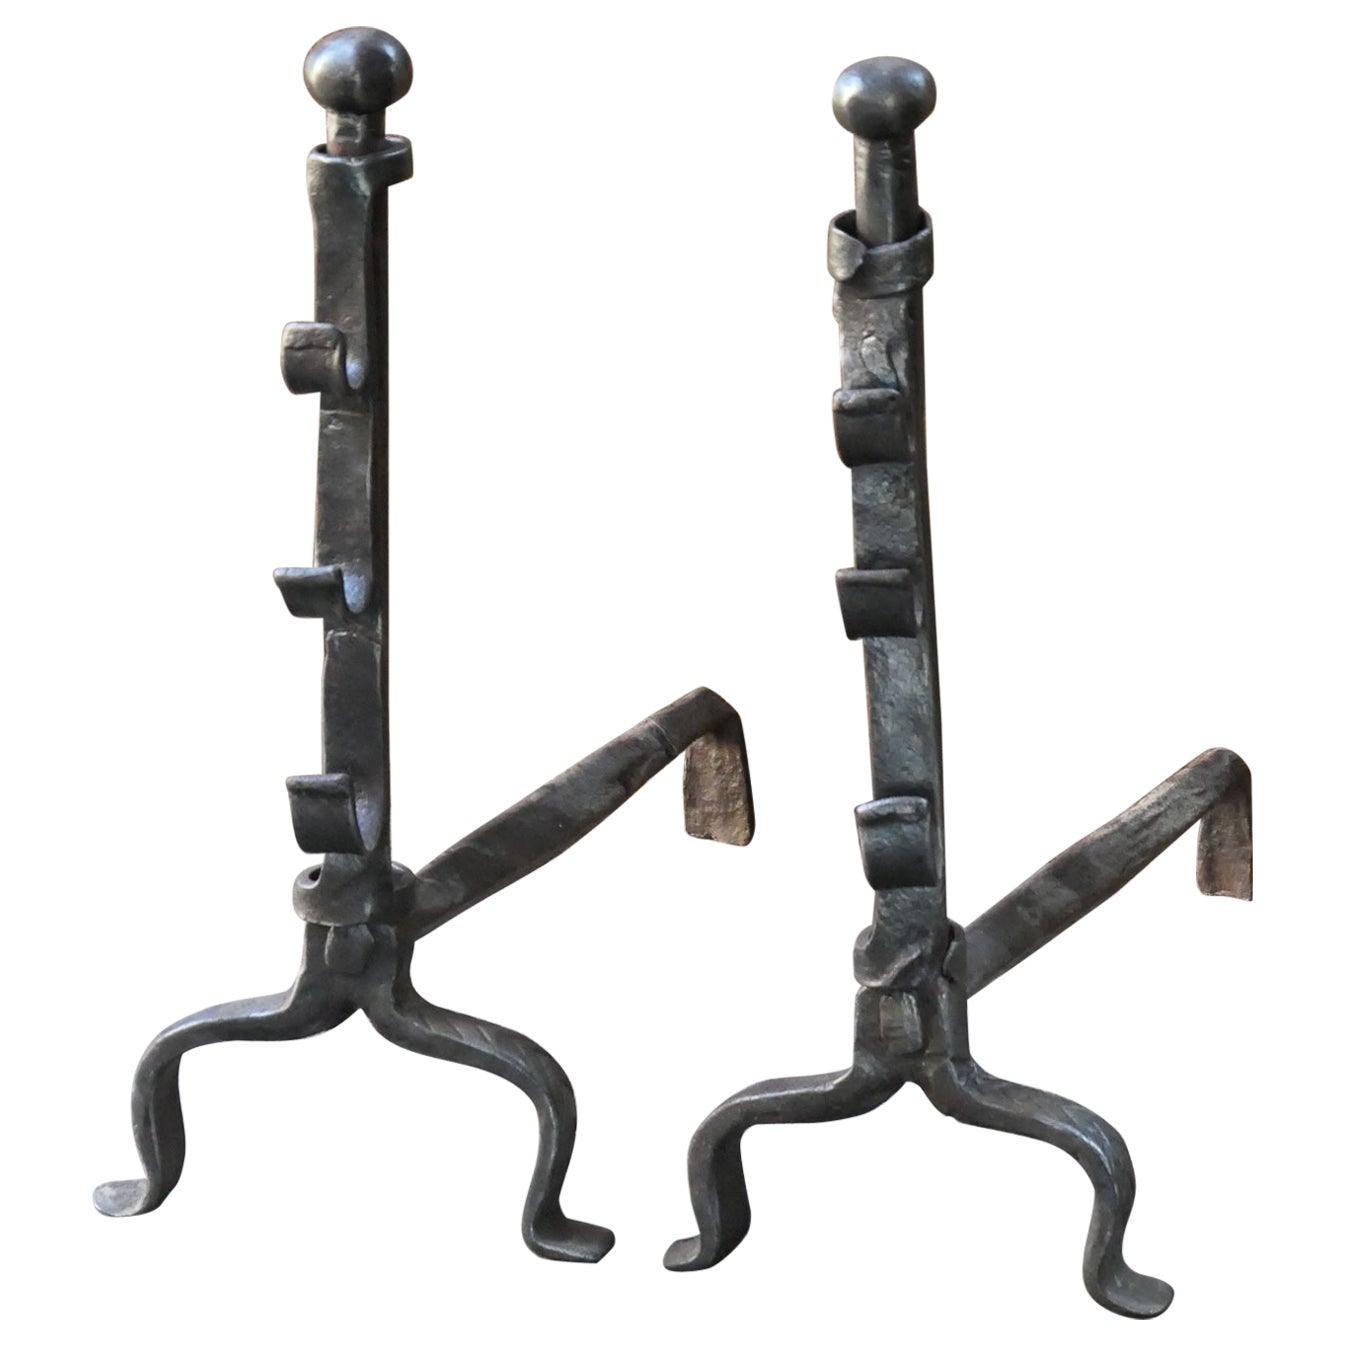 Antique French Gothic Andirons or Firedogs, 17th Century For Sale